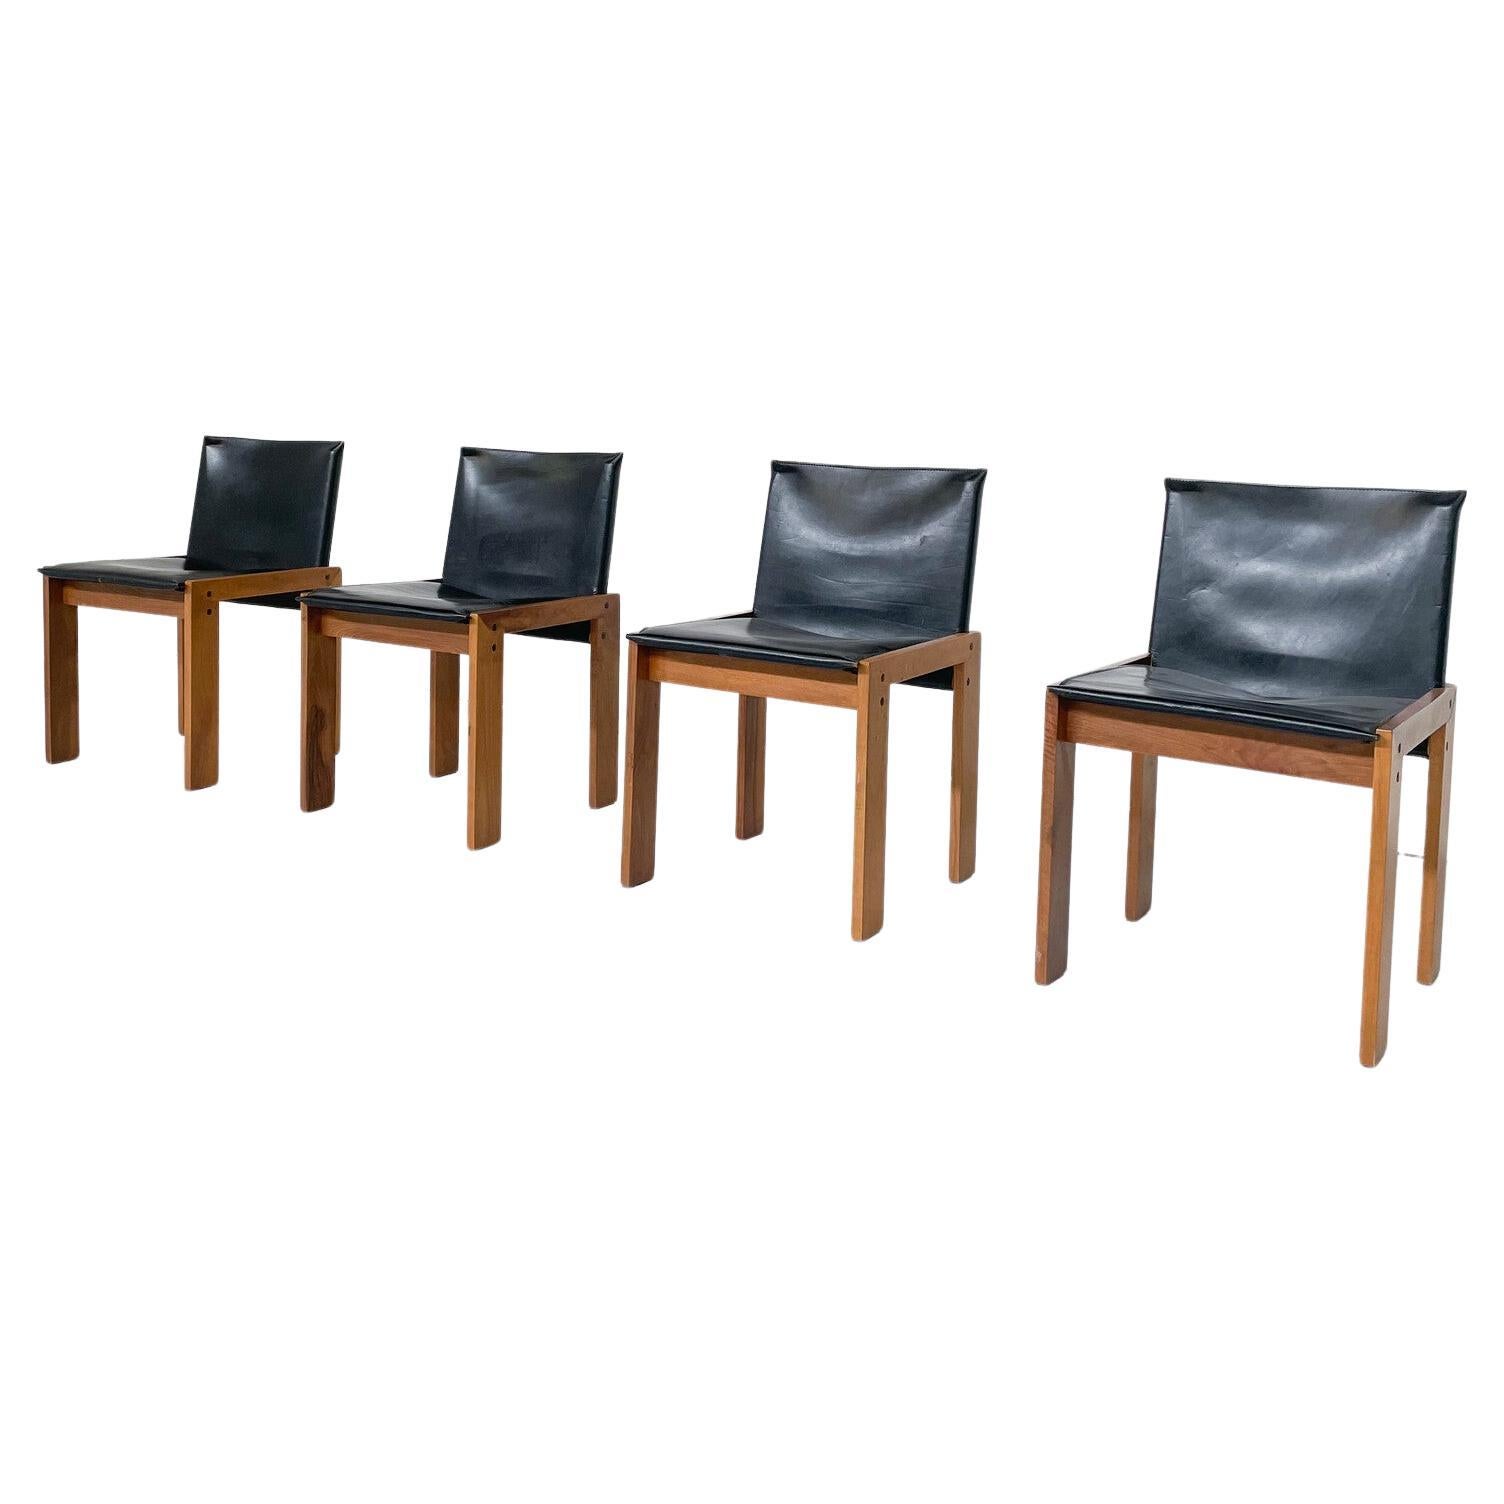 Mid-Century Modern Set of 4 Chairs in the Style of Scarpa, Wood and Leather 